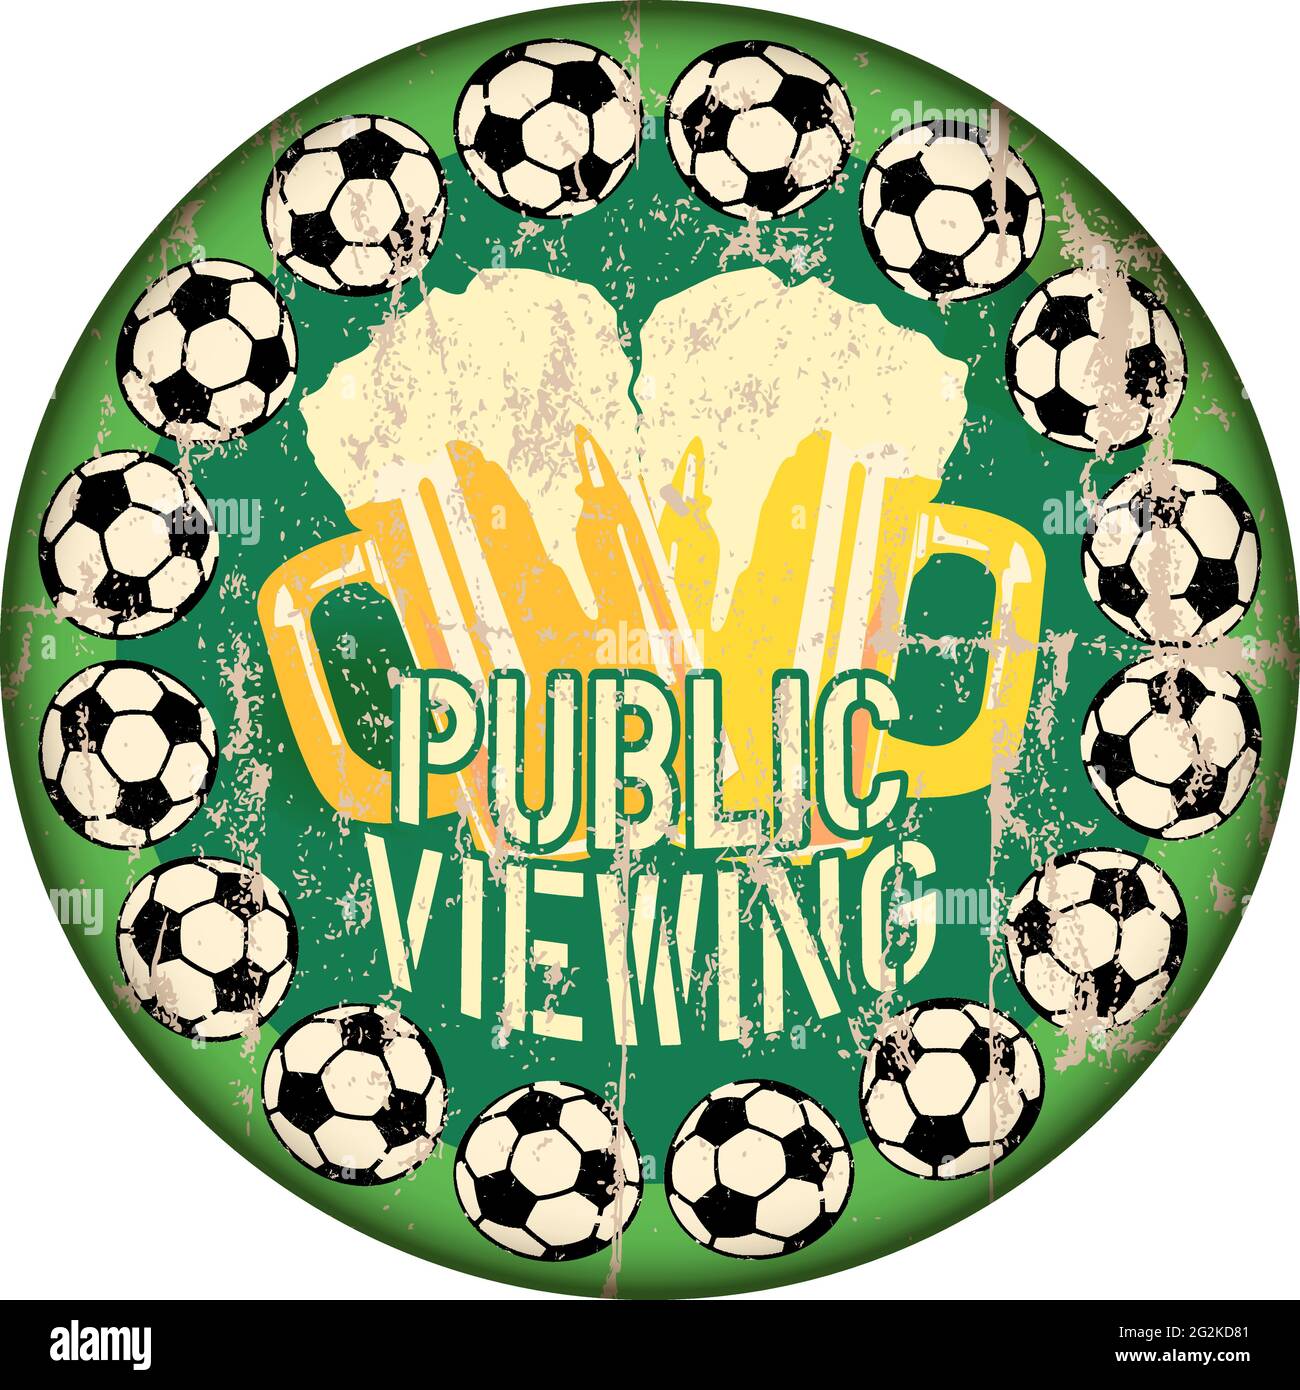 great soccer event this year, public viewing sign with soccer ball and beer, super grunge sign,vector Stock Vector